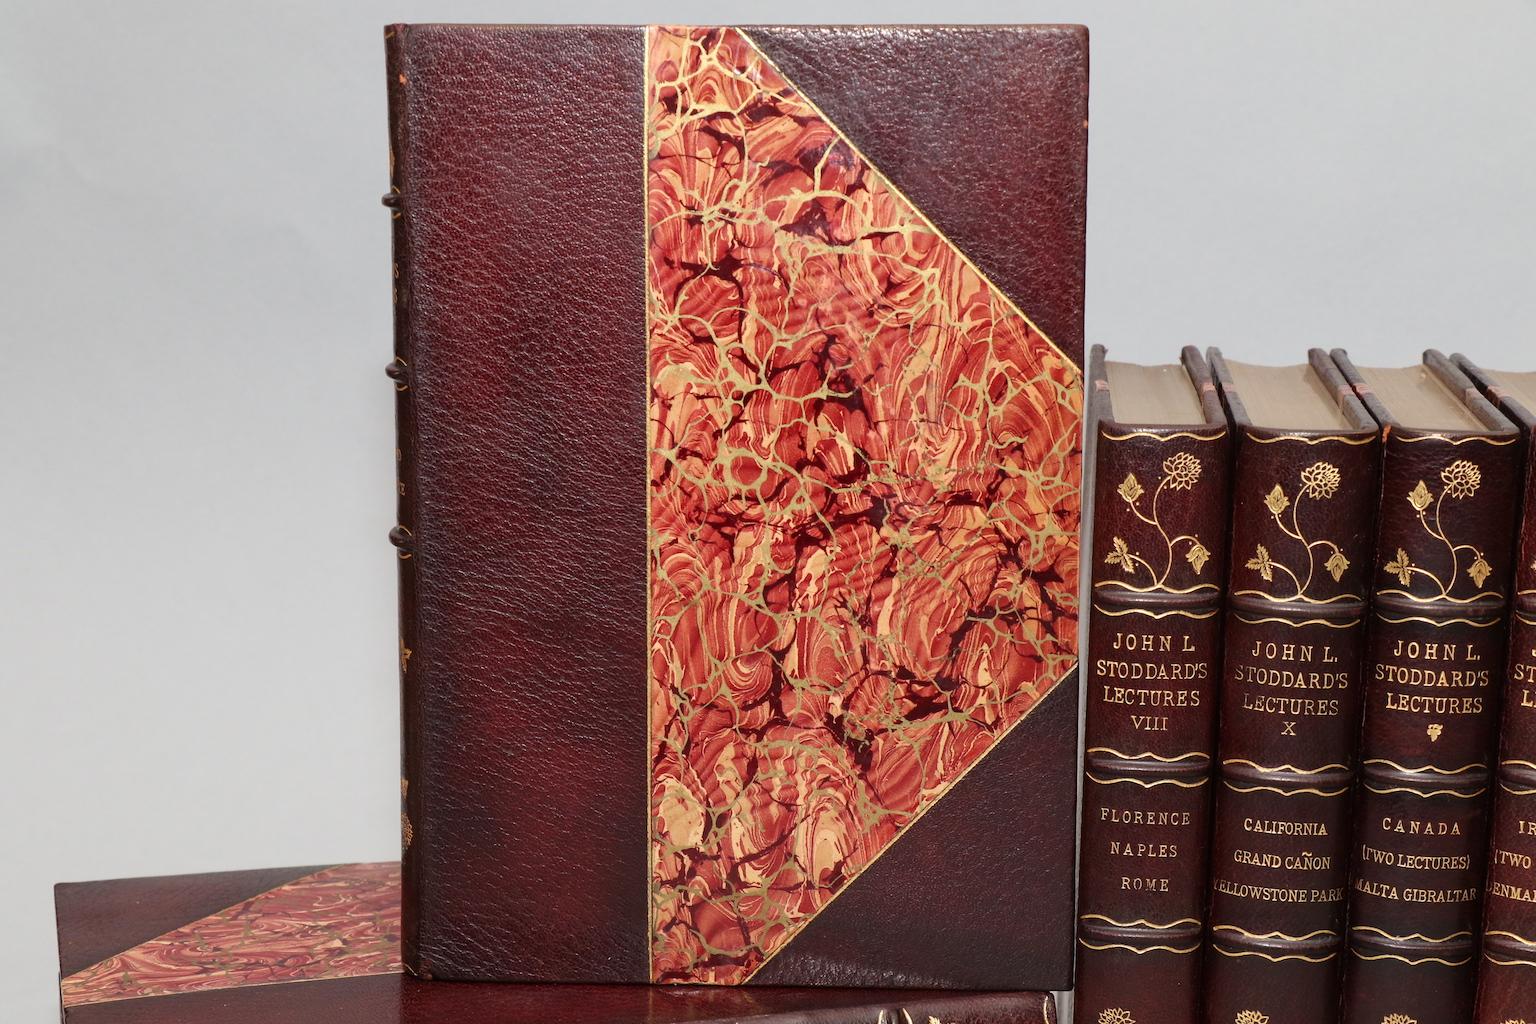 Art Edition with color. Leatherbound. Twelve volumes. Quarto. Limited to five hundred copies which this is #458. Bound in three quarter wine morocco, marbled boards, top edges gilt, raised bands, & gilt panels. Very good. Published in Boston by